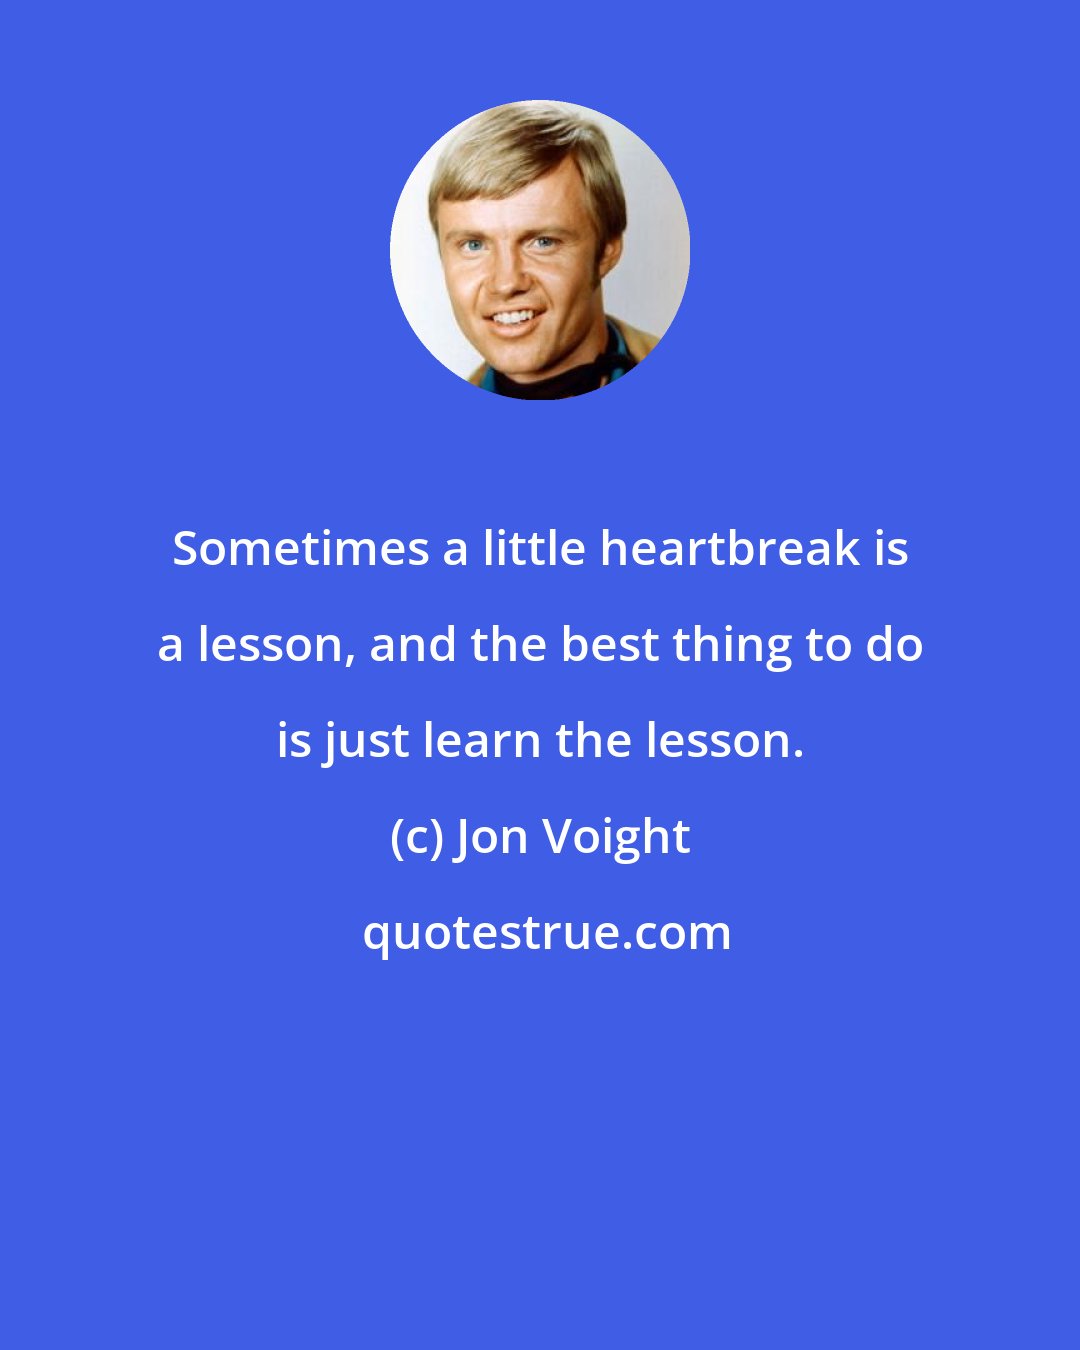 Jon Voight: Sometimes a little heartbreak is a lesson, and the best thing to do is just learn the lesson.